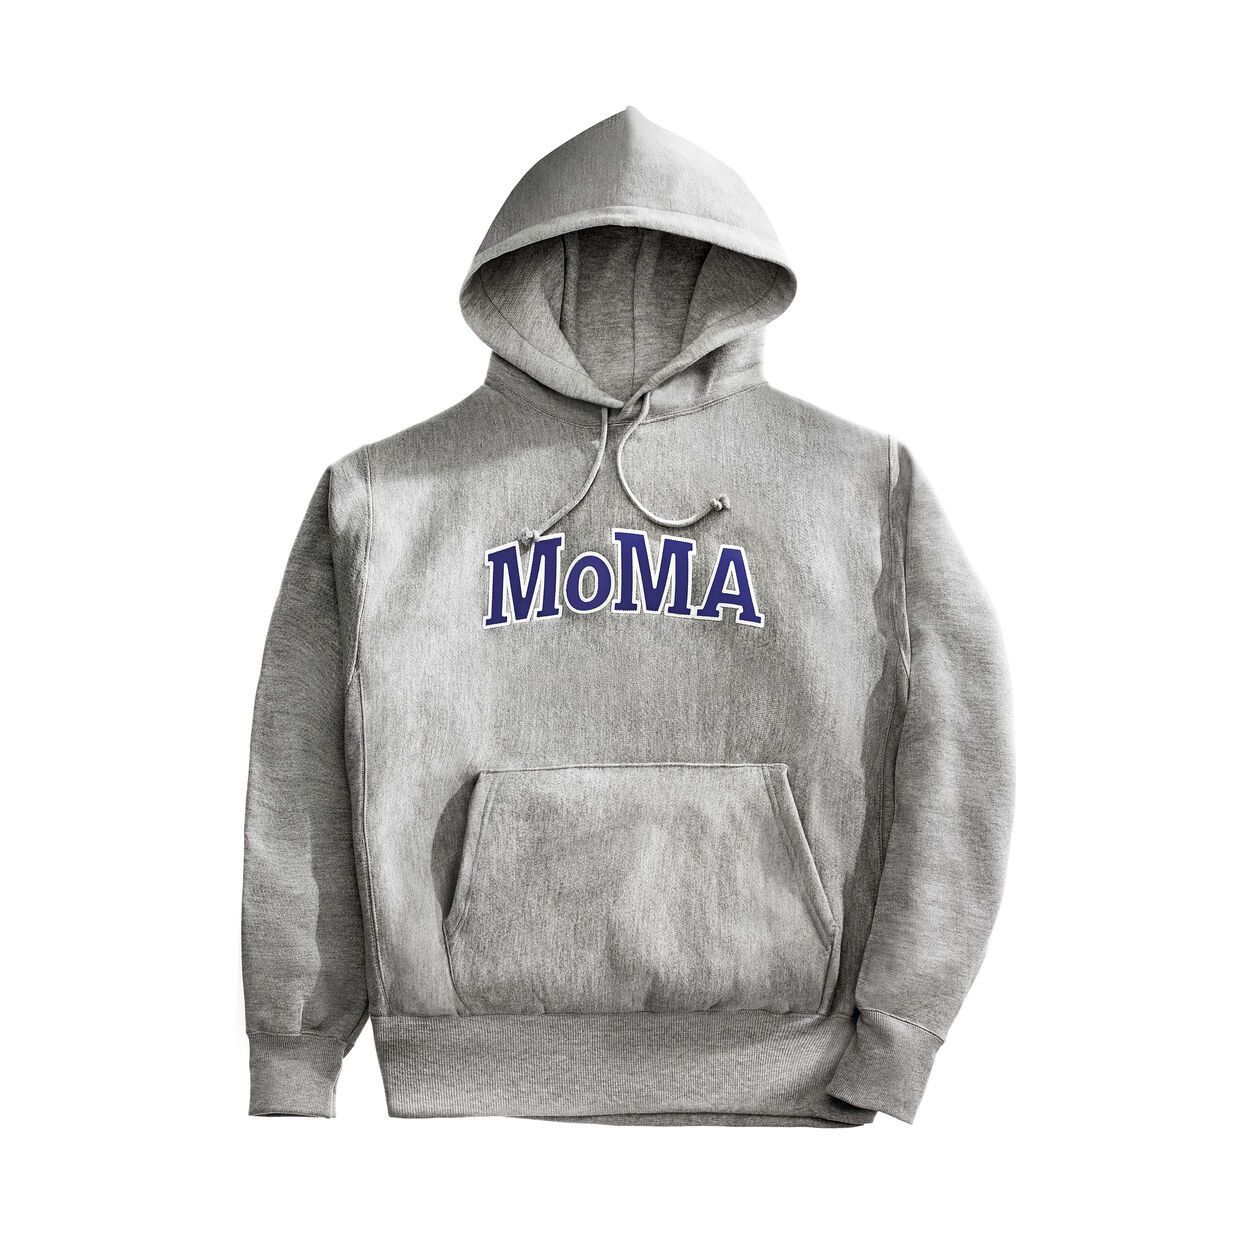 Champion Champion Hoodie - MoMA Edition Size US M / EU 48-50 / 2 - 1 Preview